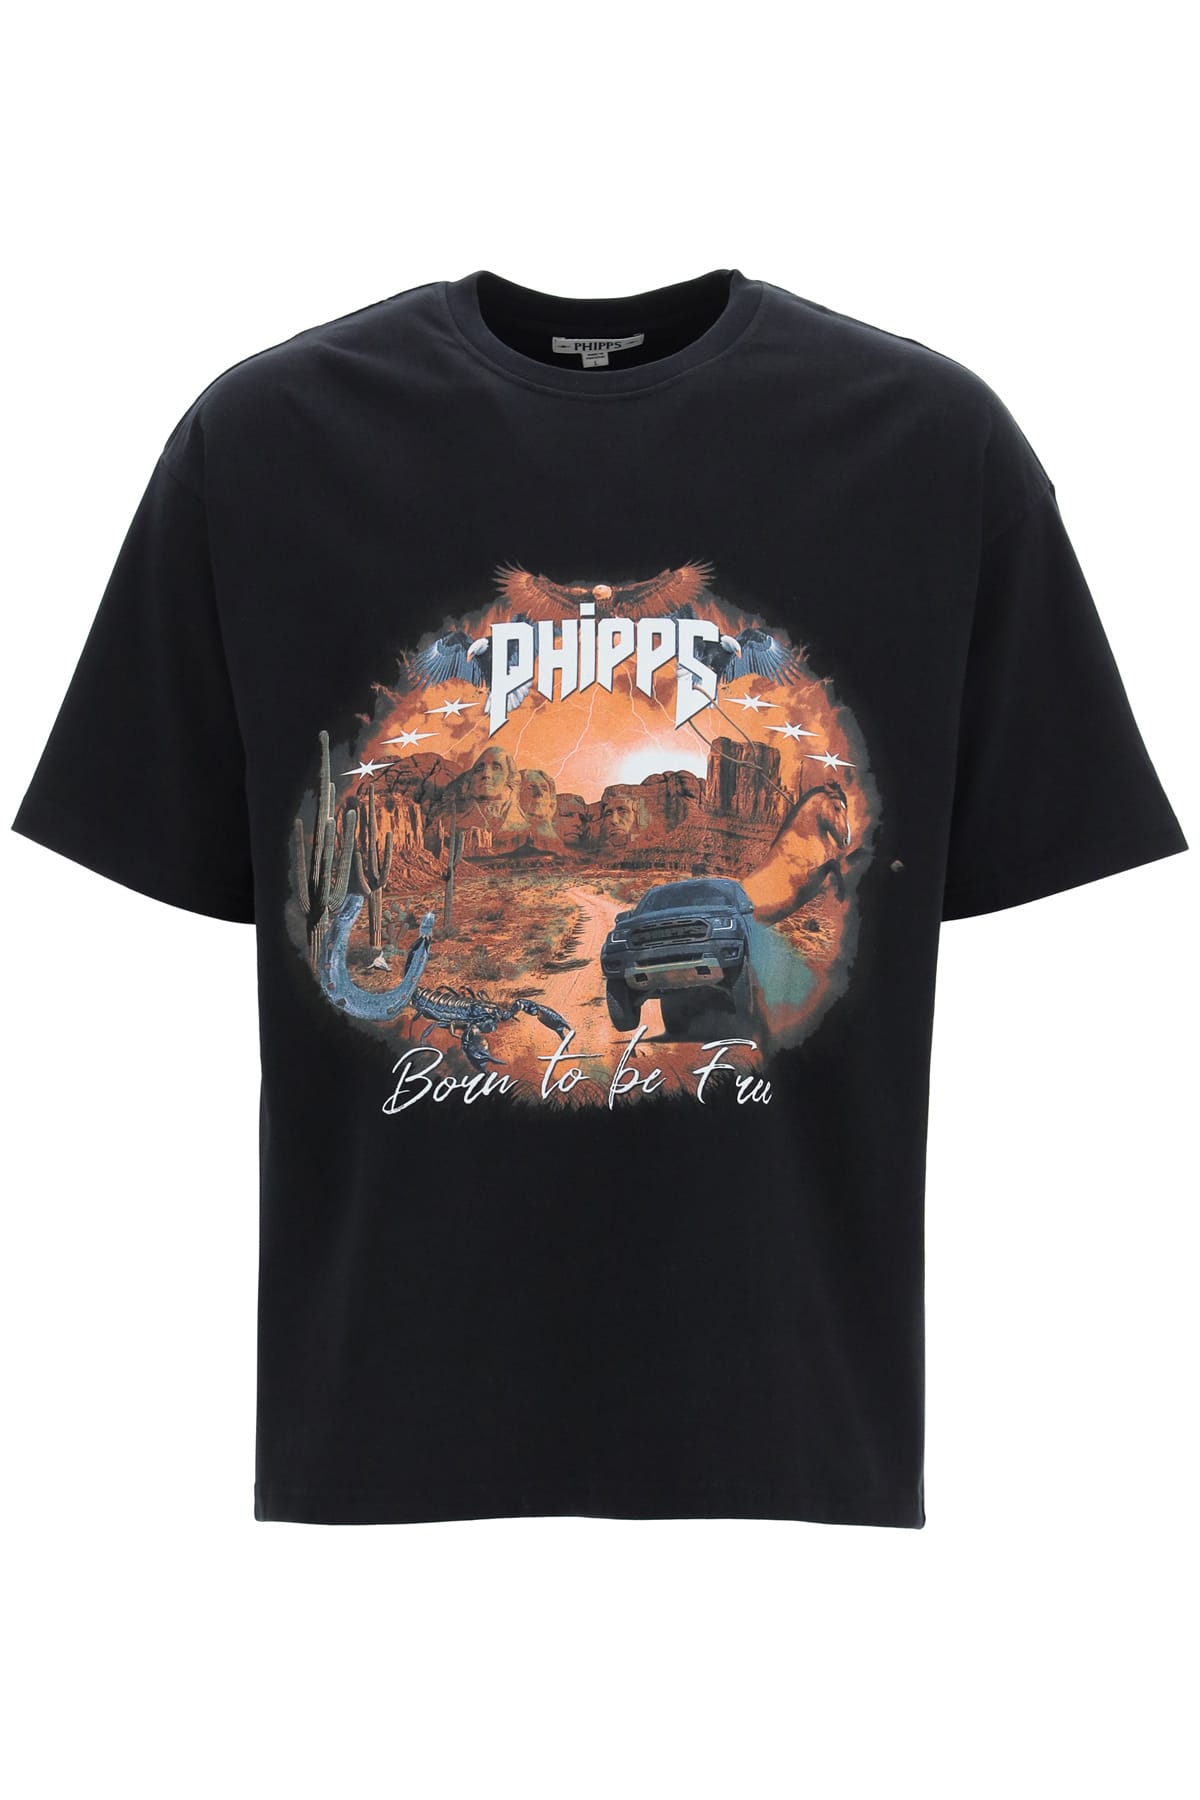 Phipps born To Be Free T-shirt